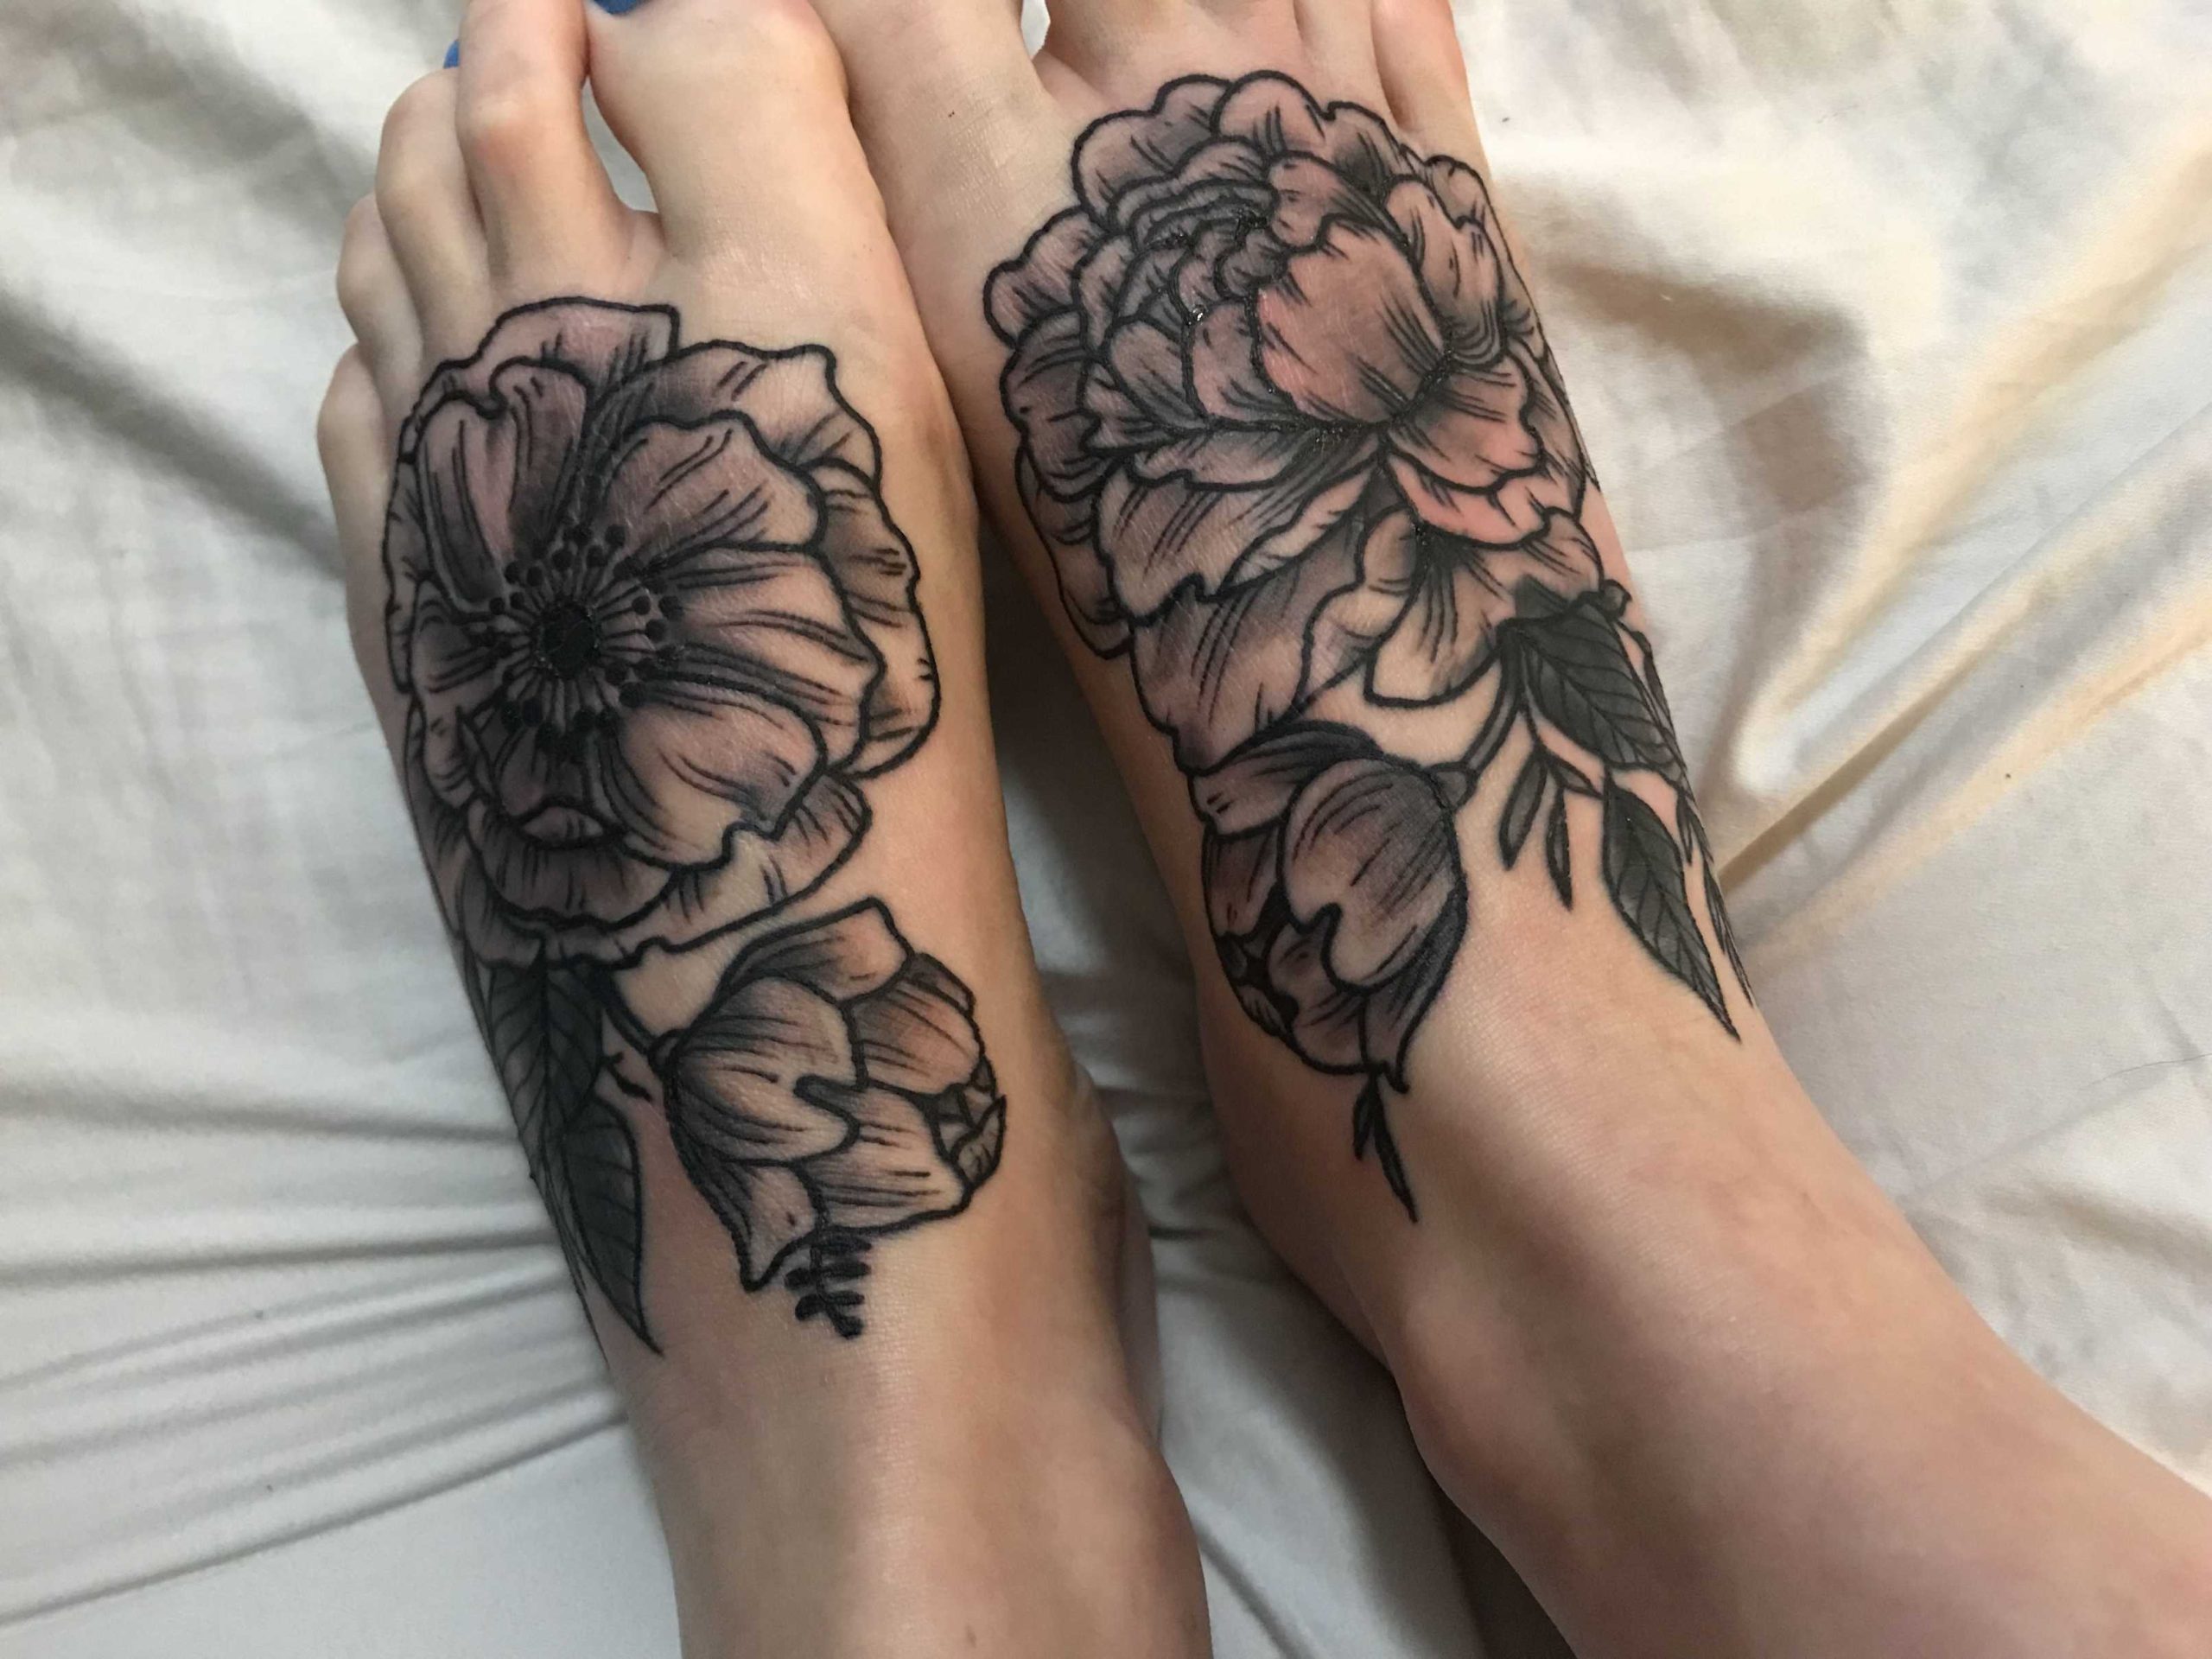 Cover up tattoo / foot tattoo  Cover up tattoos, Up tattoos, Foot